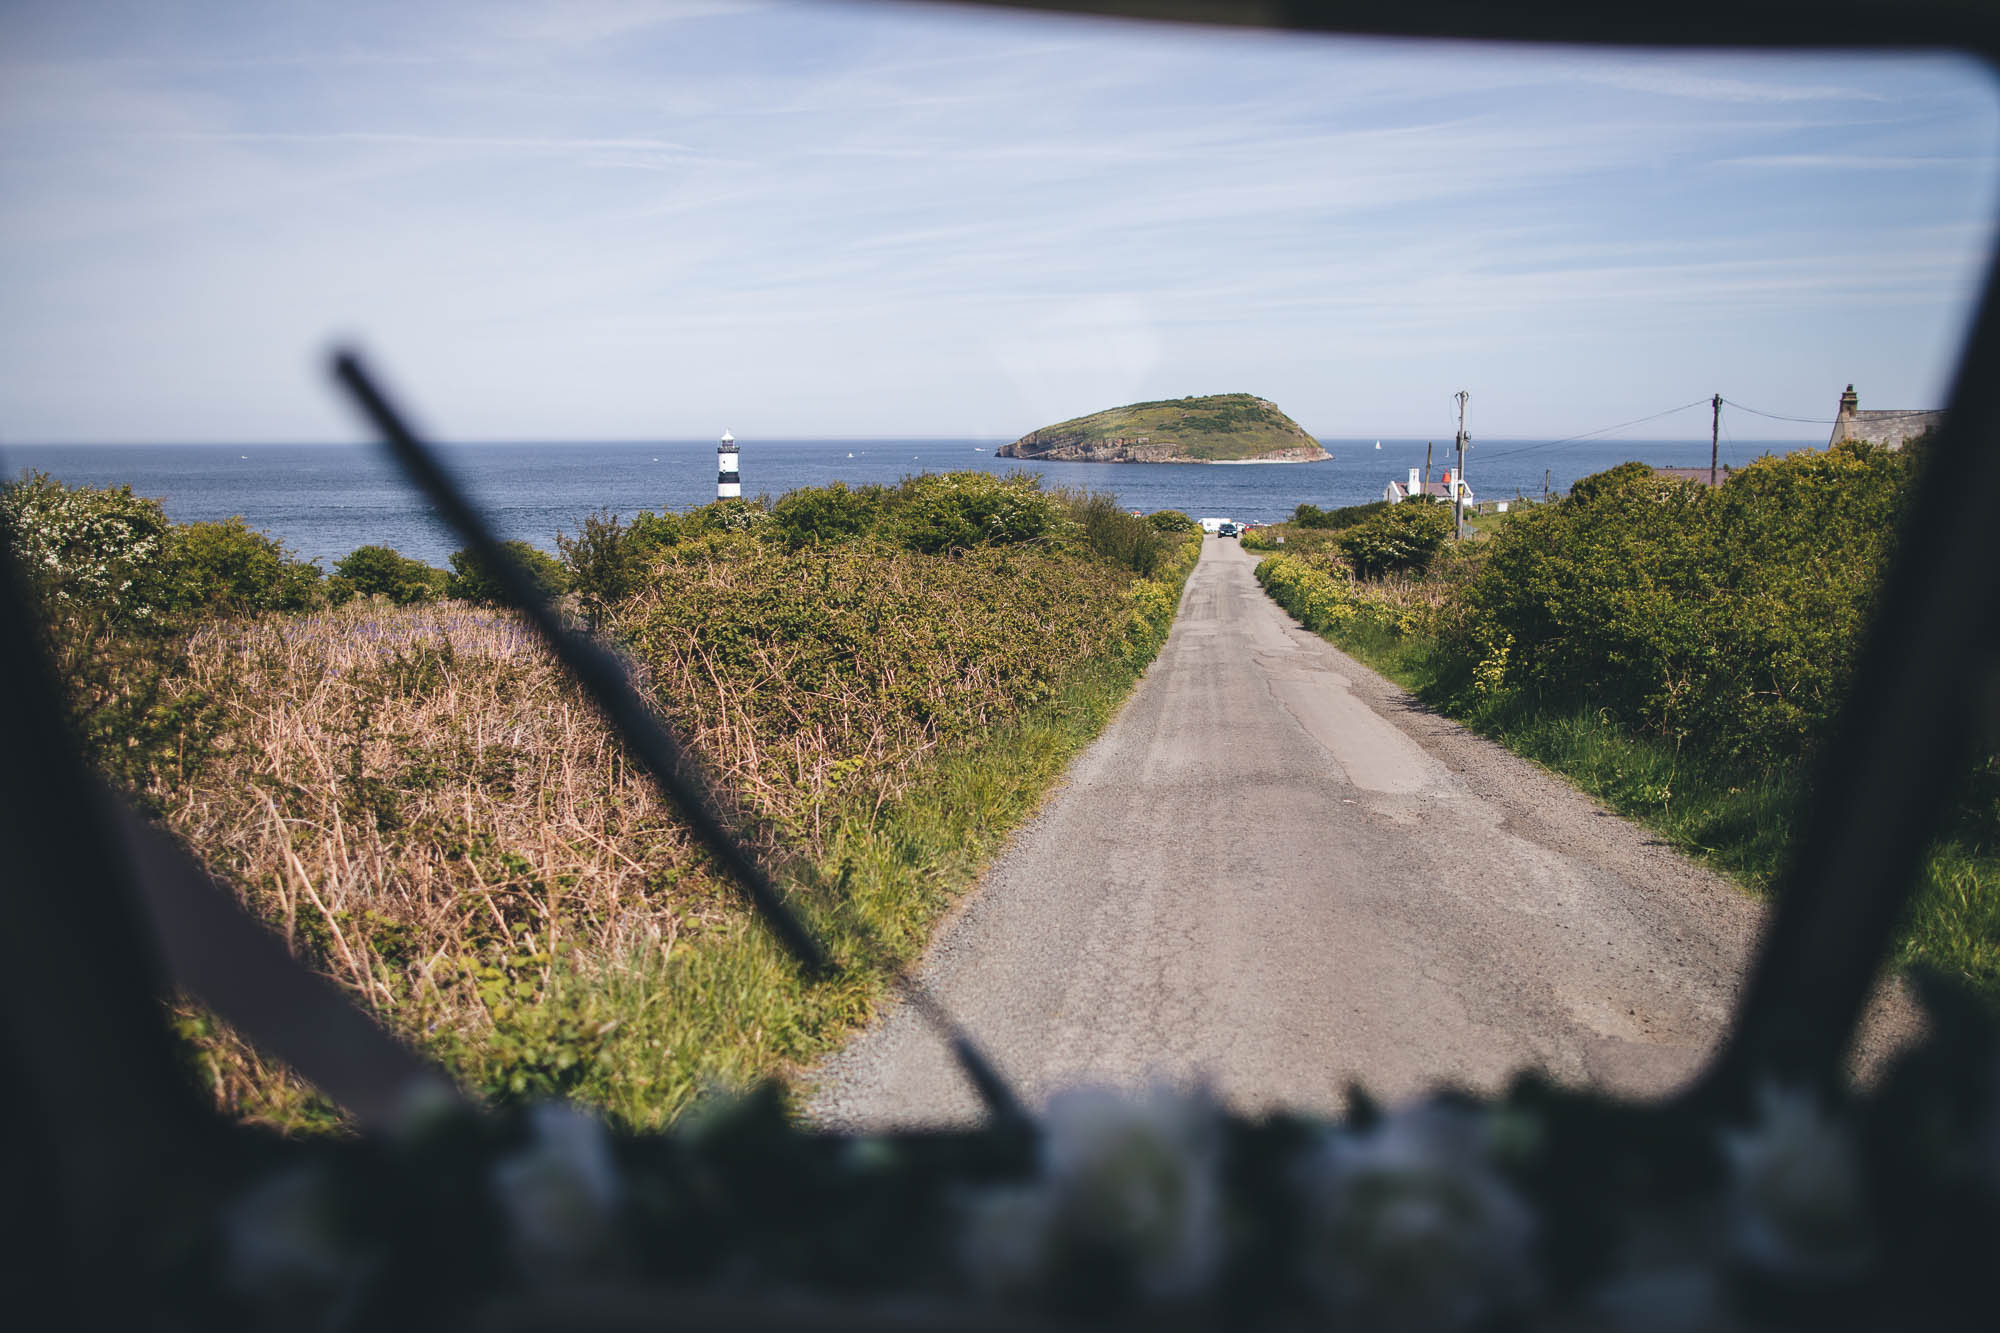 Looking down a country road through vintage car window to see the coastline and small Welsh island in the distance